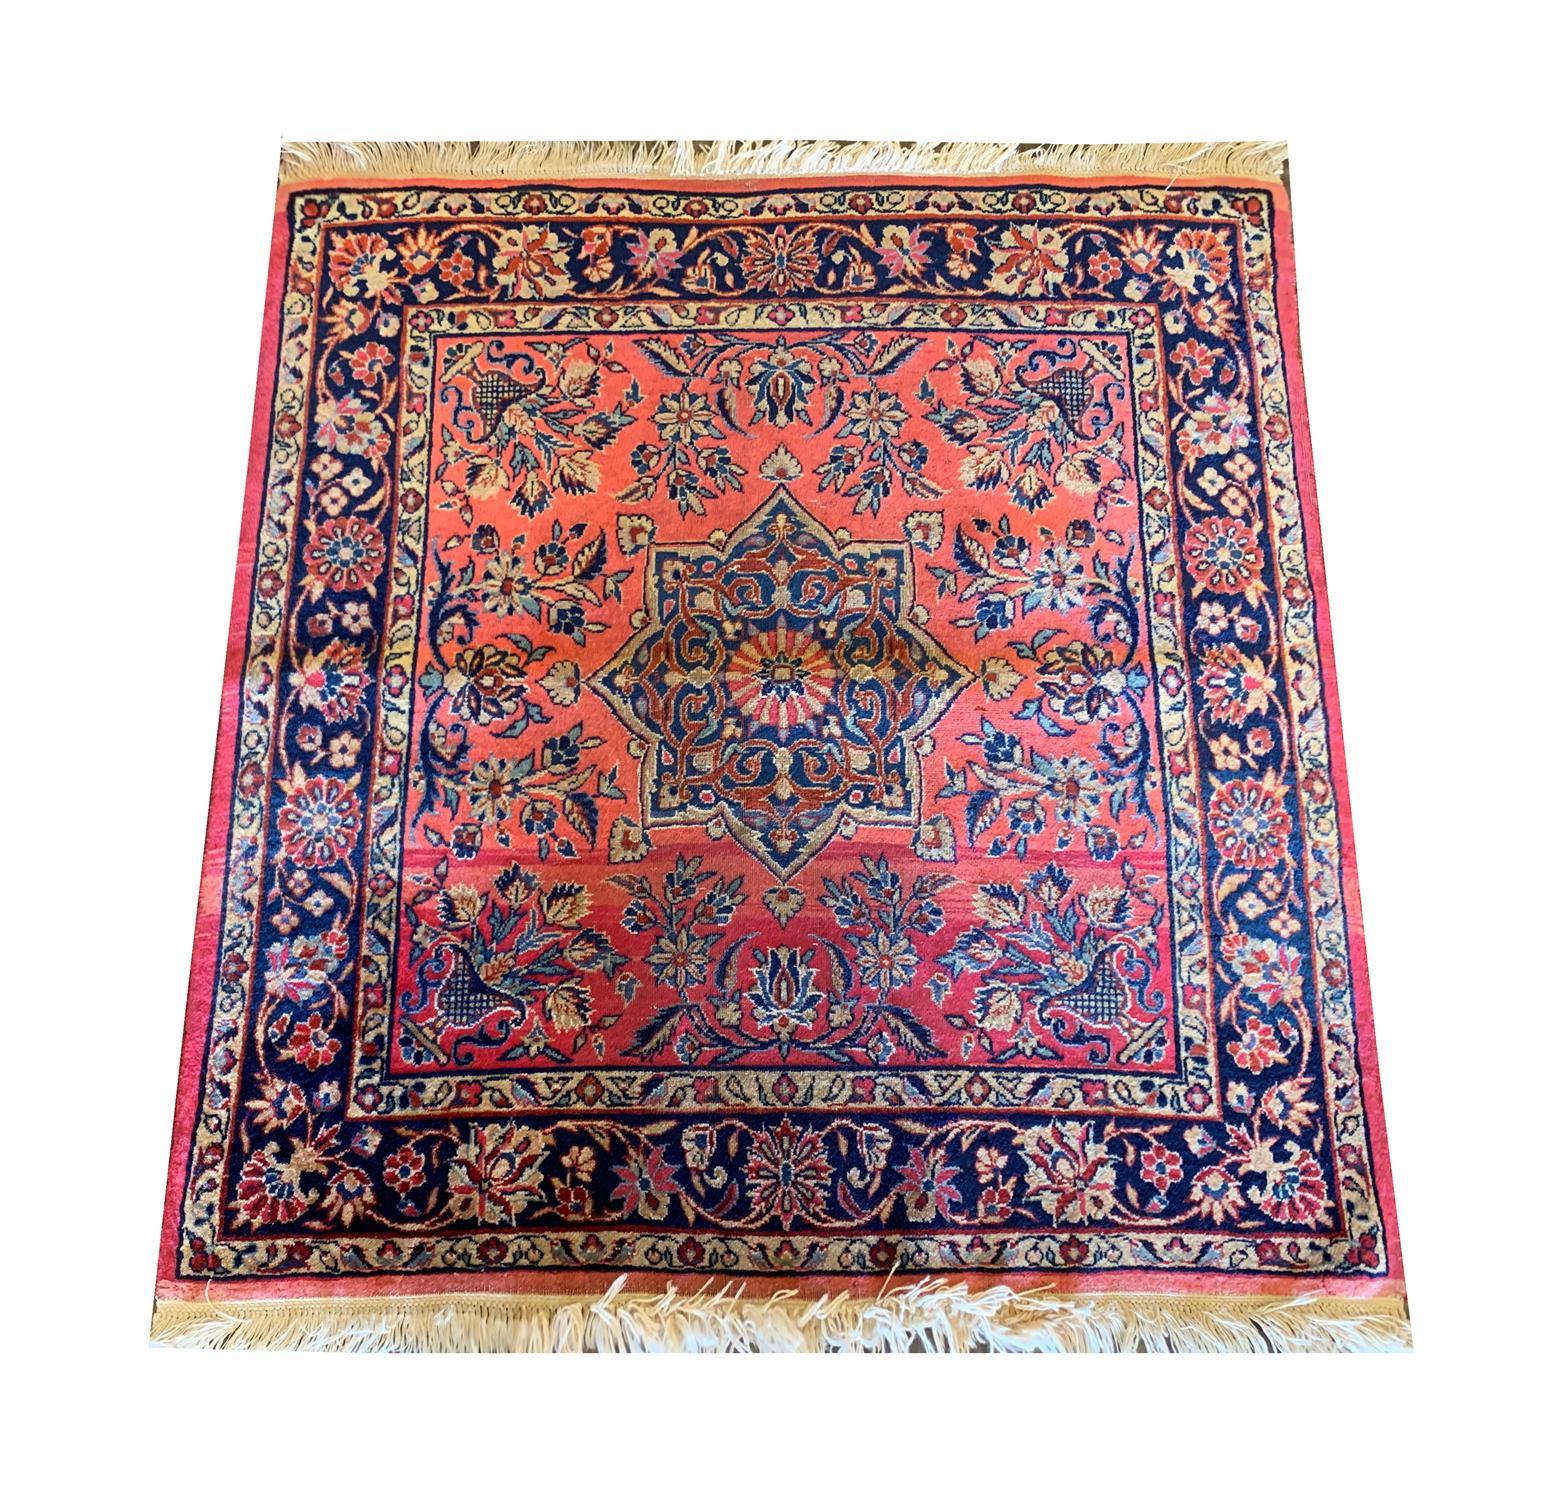 This fine wool rug was hand-knotted in the 1880s in Turkey with locally sourced organic materials. The central design has been woven on a rich rust background with a grand medallion design; flowers and leaves have been intricately woven throughout